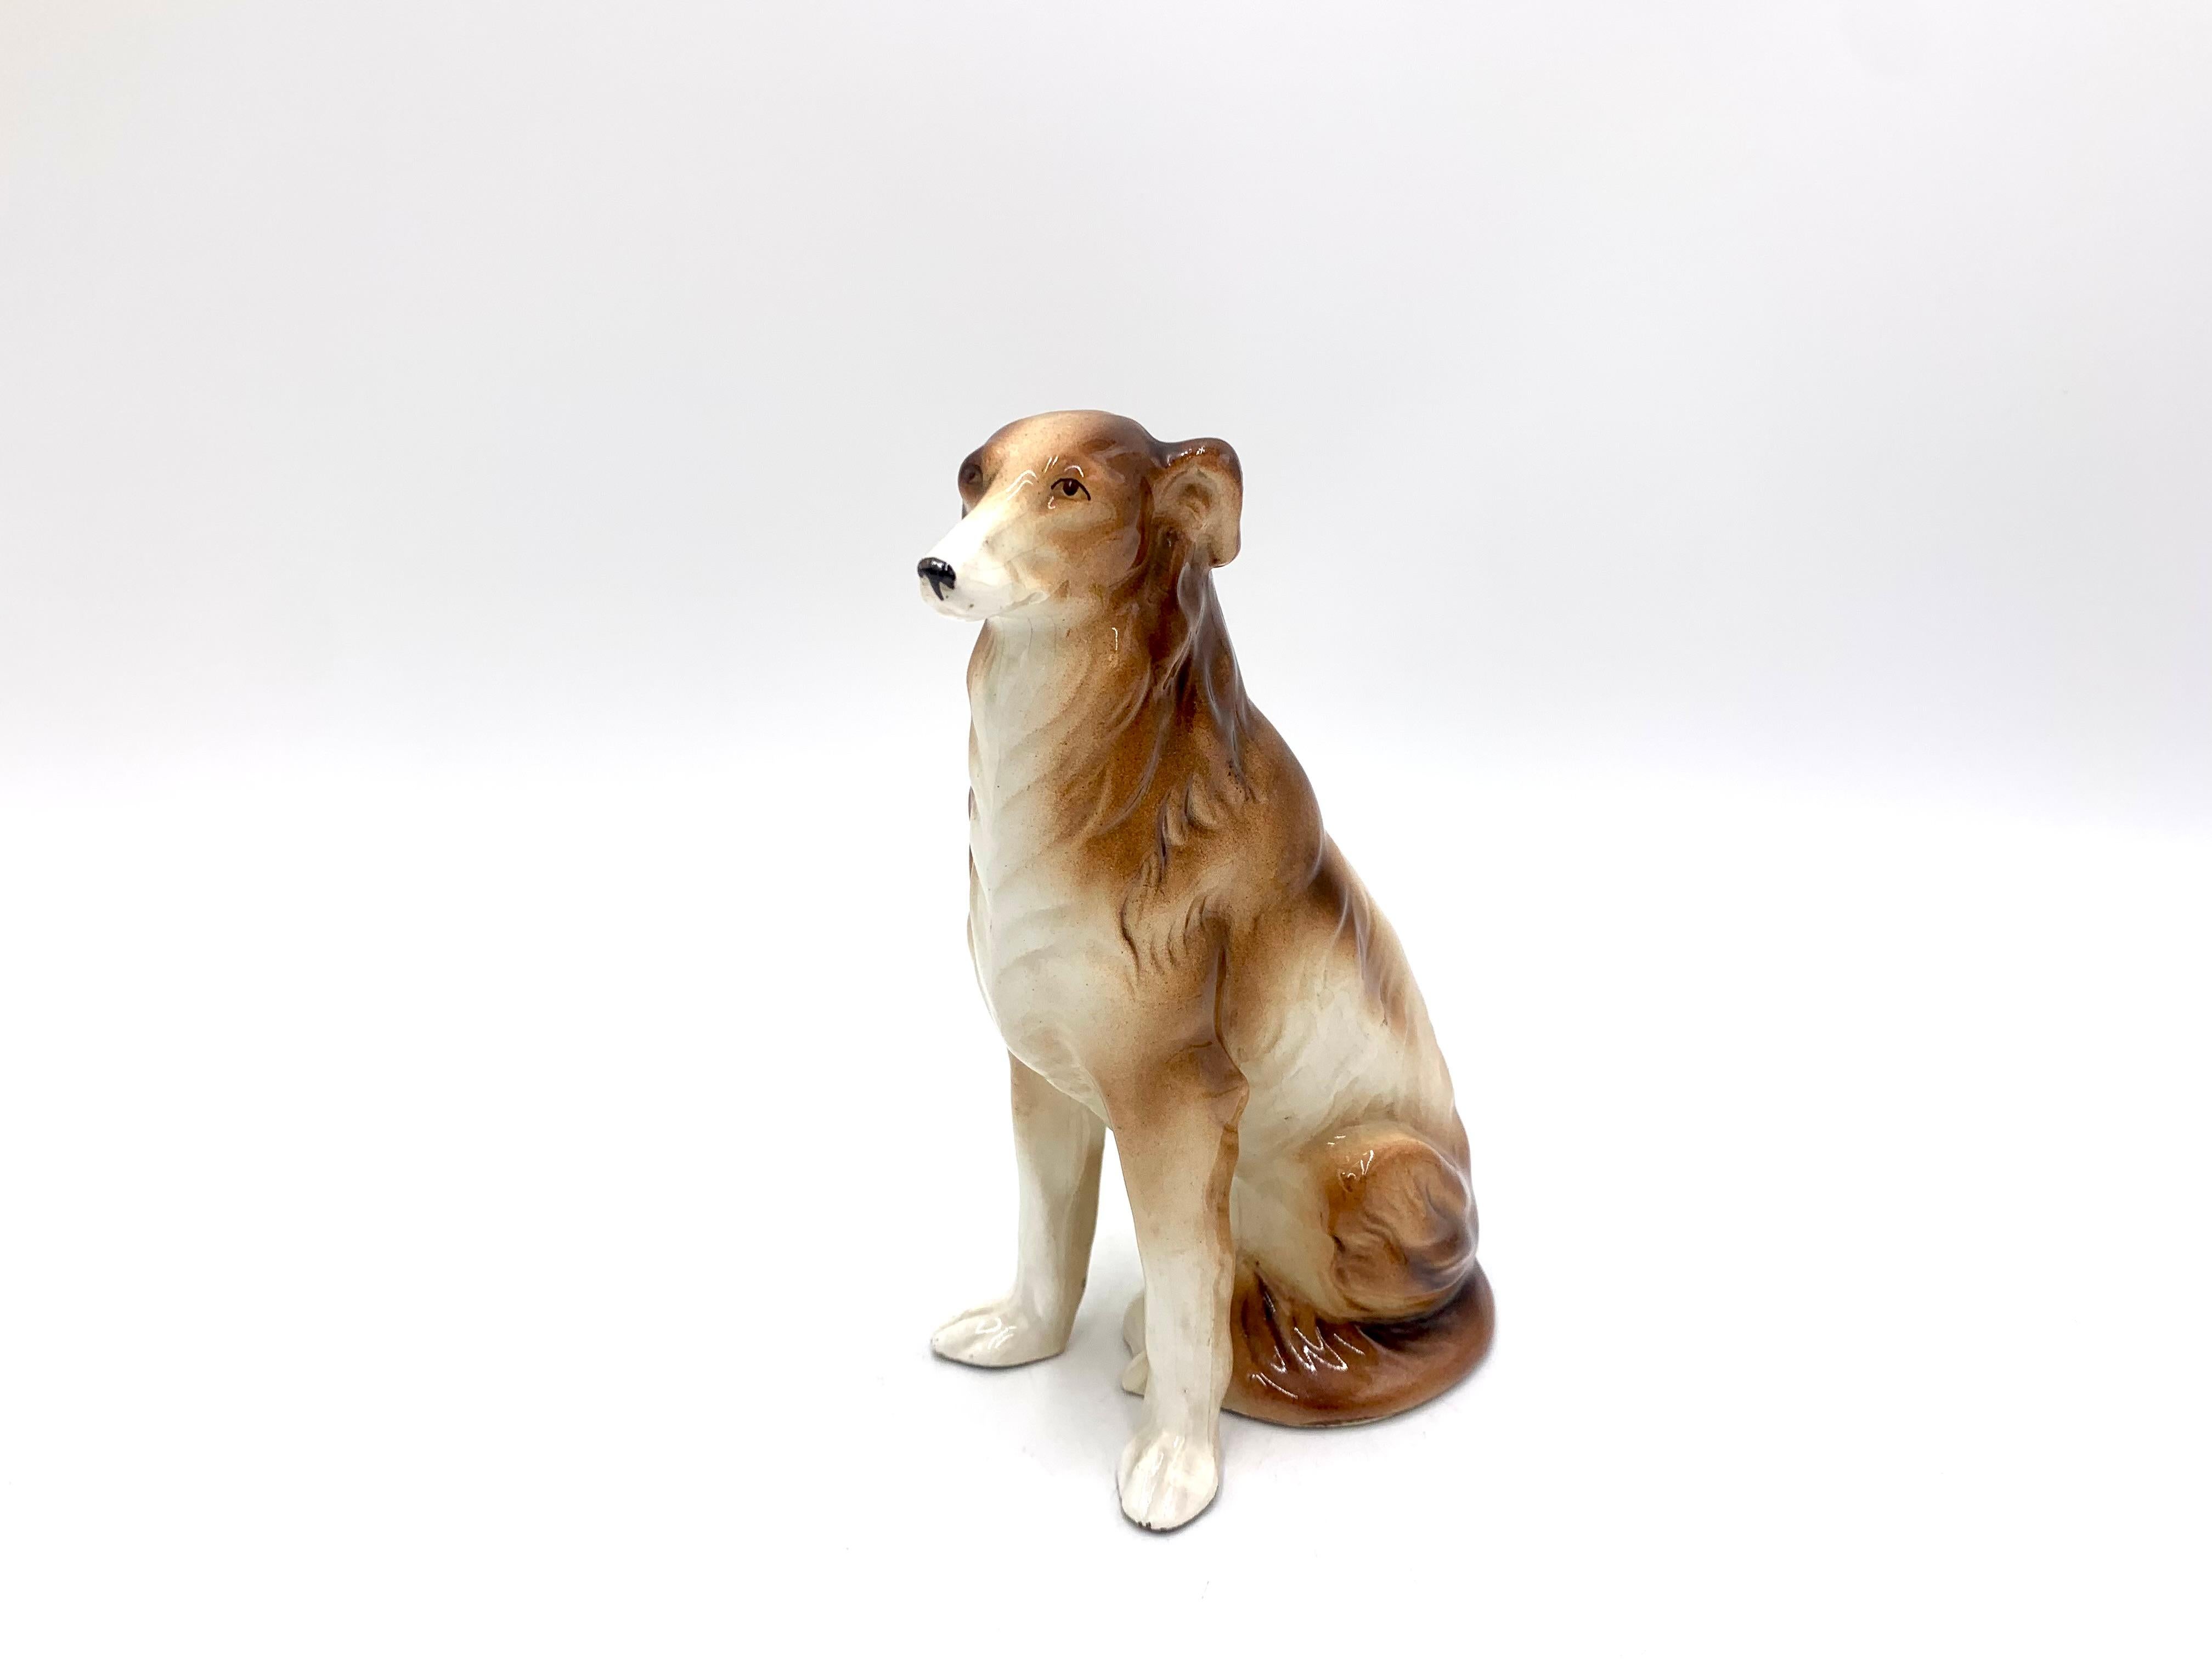 Ceramic figurine of a sitting dog

No signature

Probably the 1960s.

height 17cm, width 10cm, depth 6cm